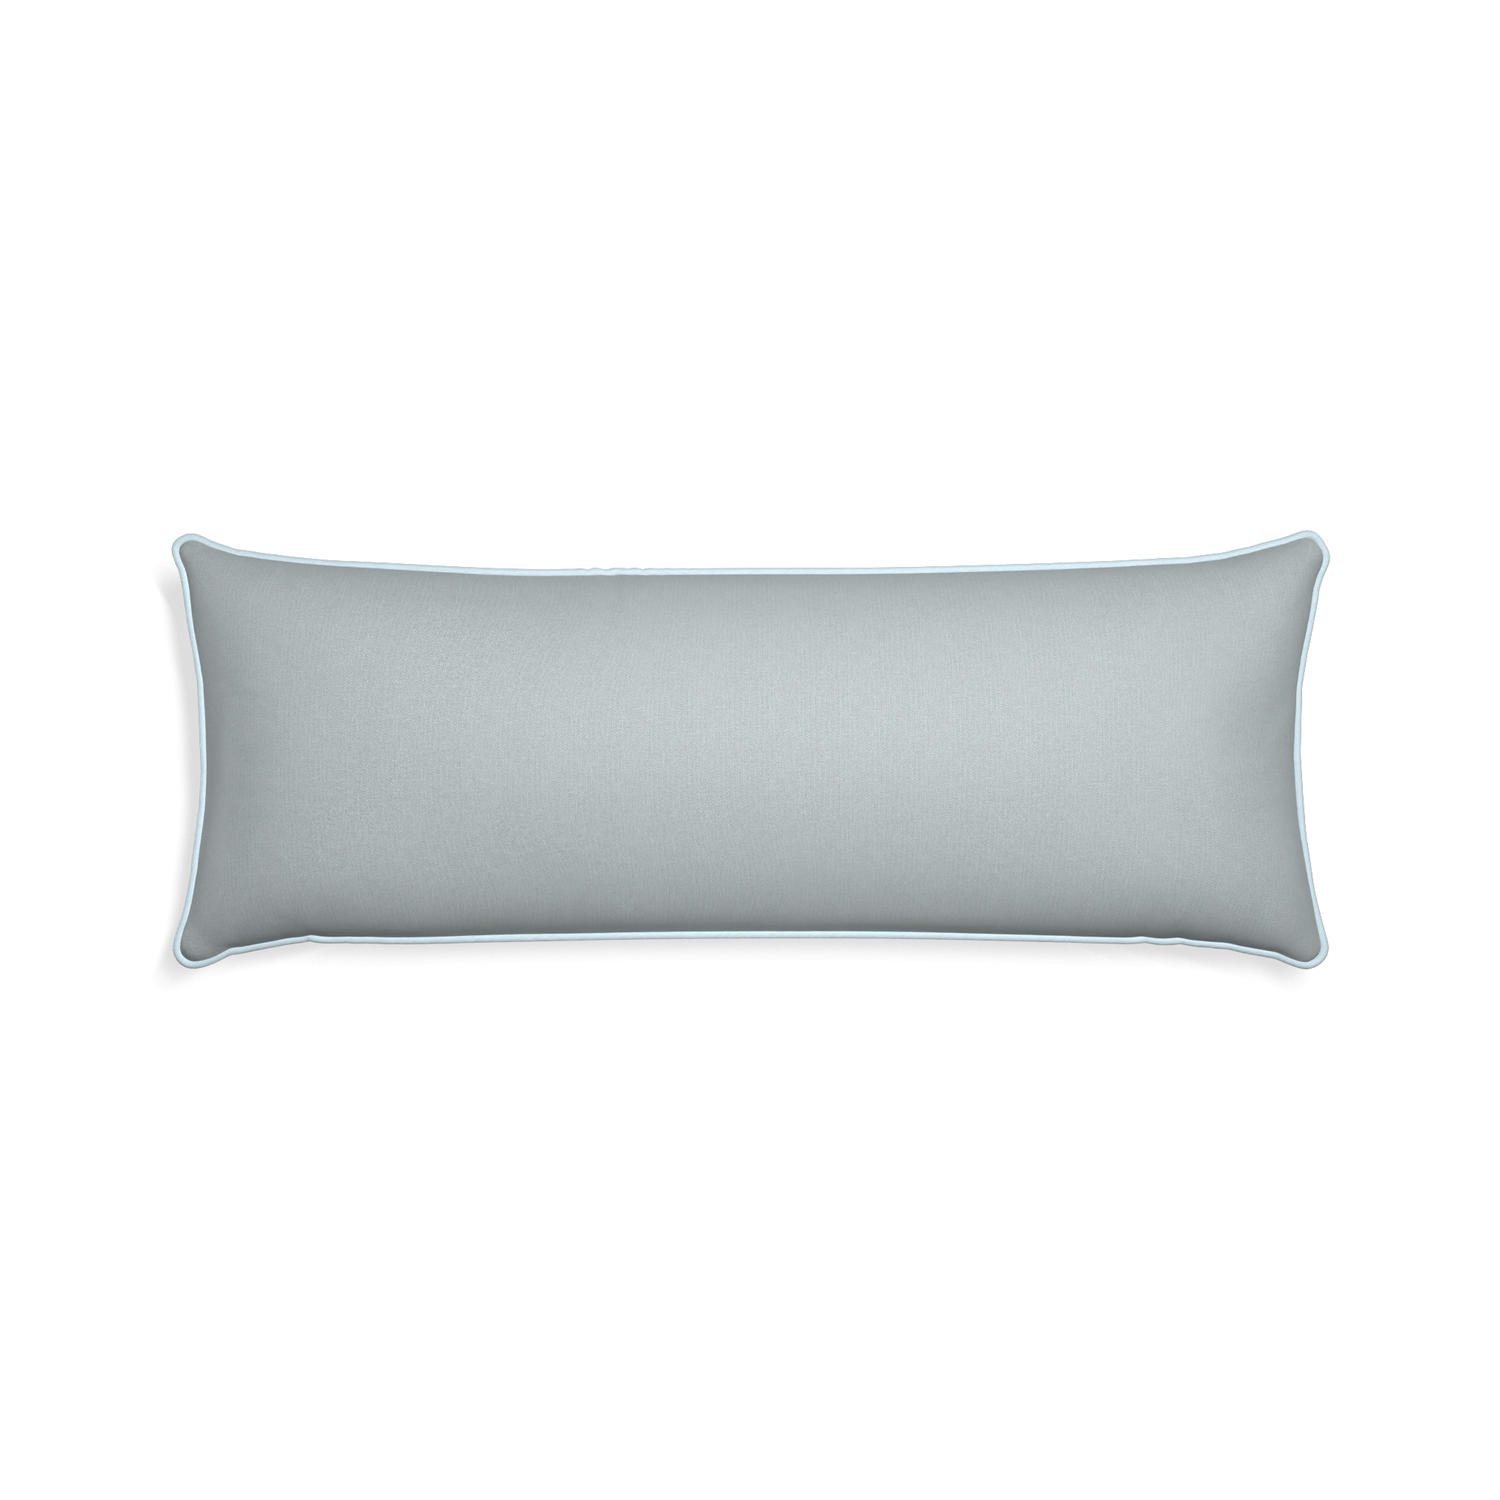 Xl-lumbar sea custom grey bluepillow with powder piping on white background